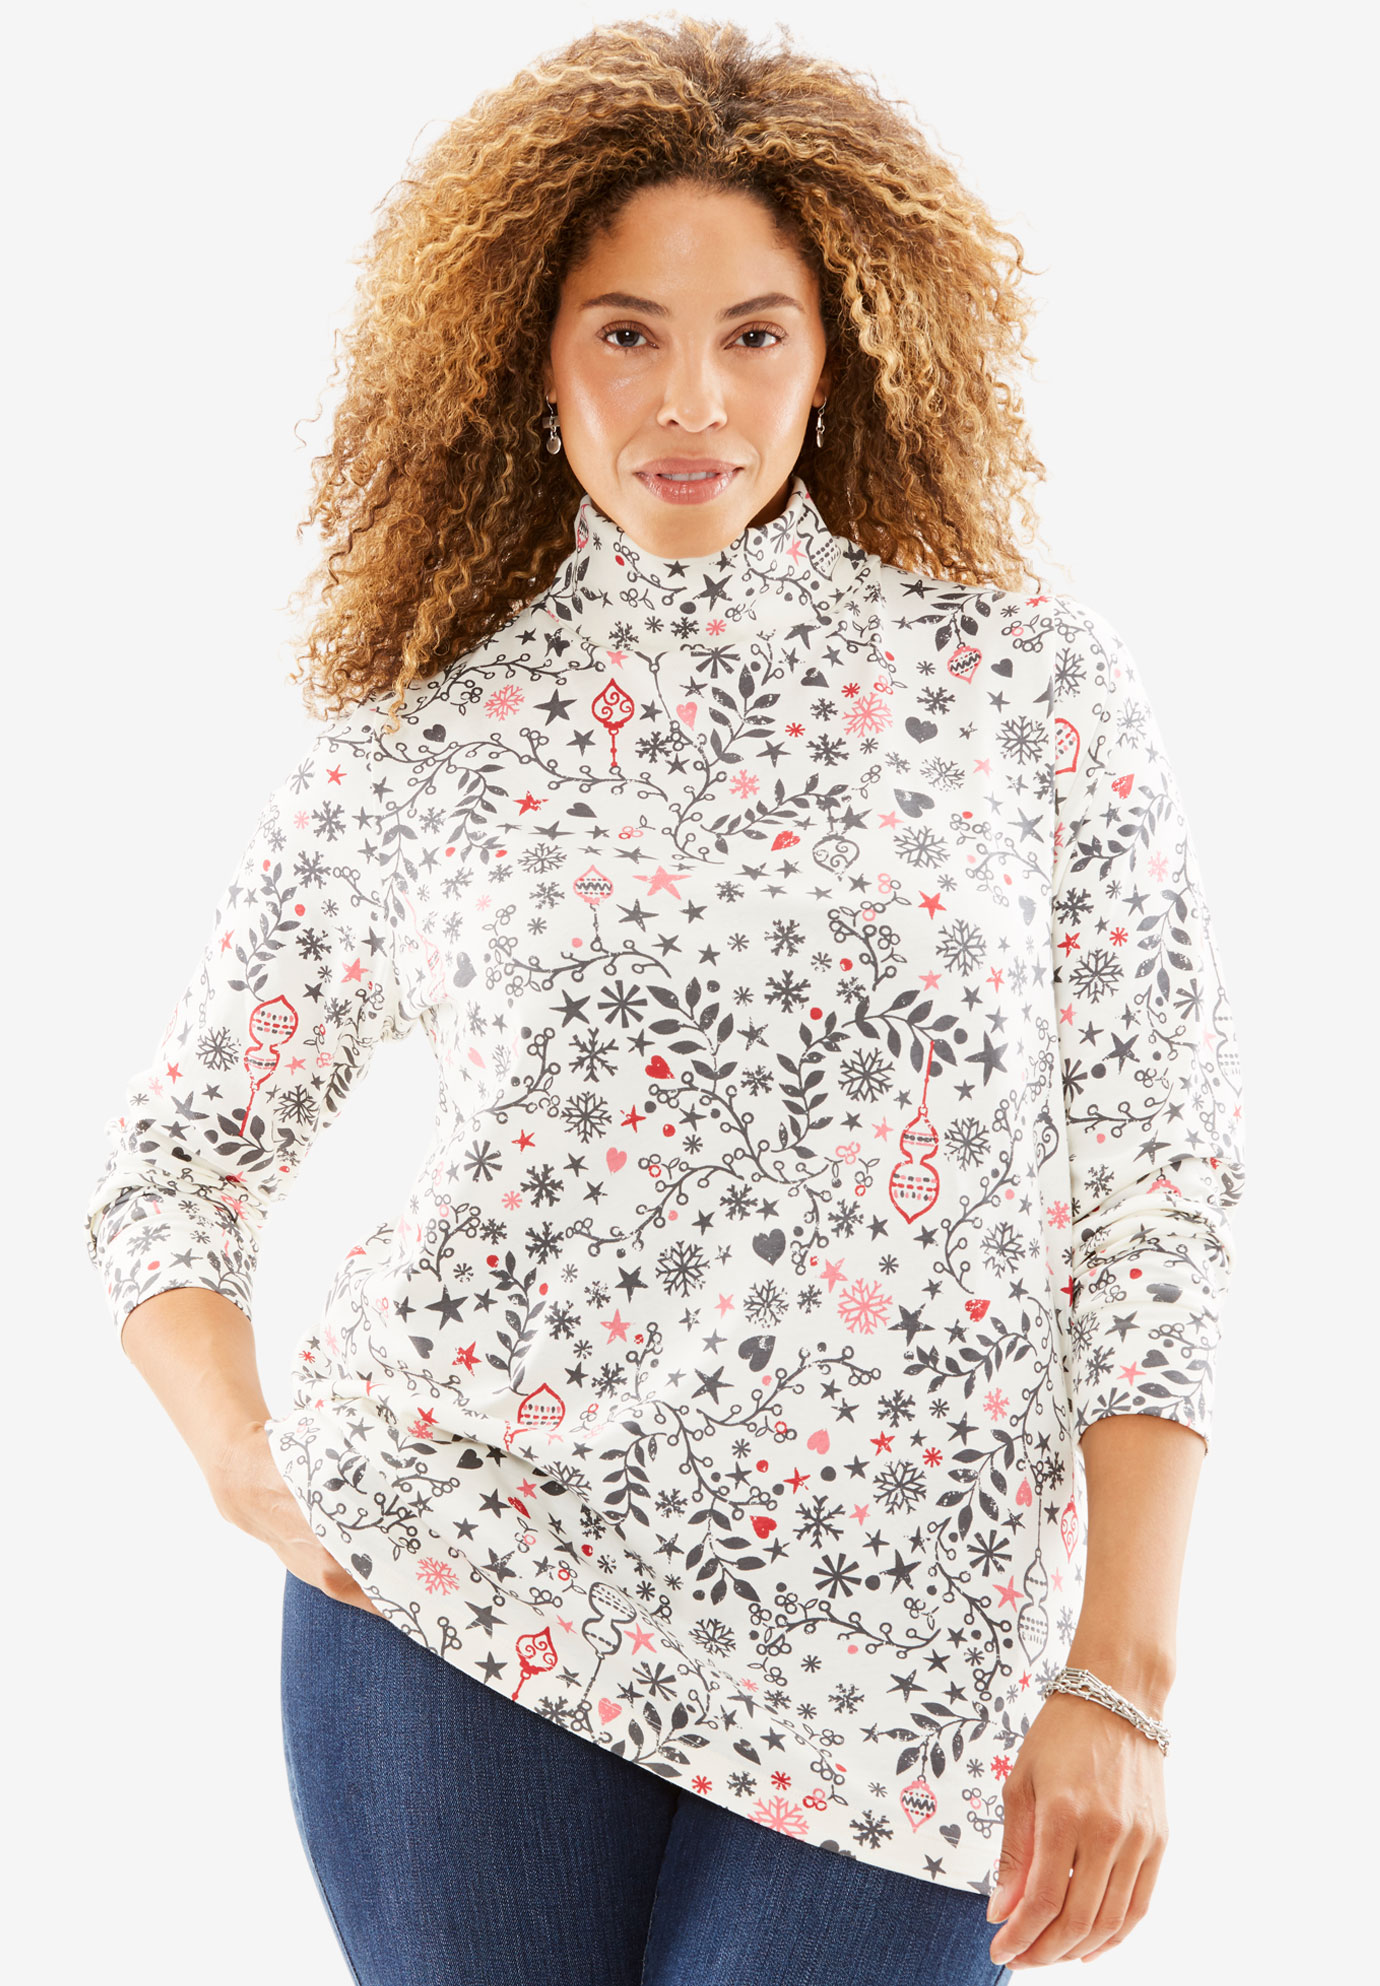 Perfect Print Turtleneck Tee | Plus Size Tops | Woman Within